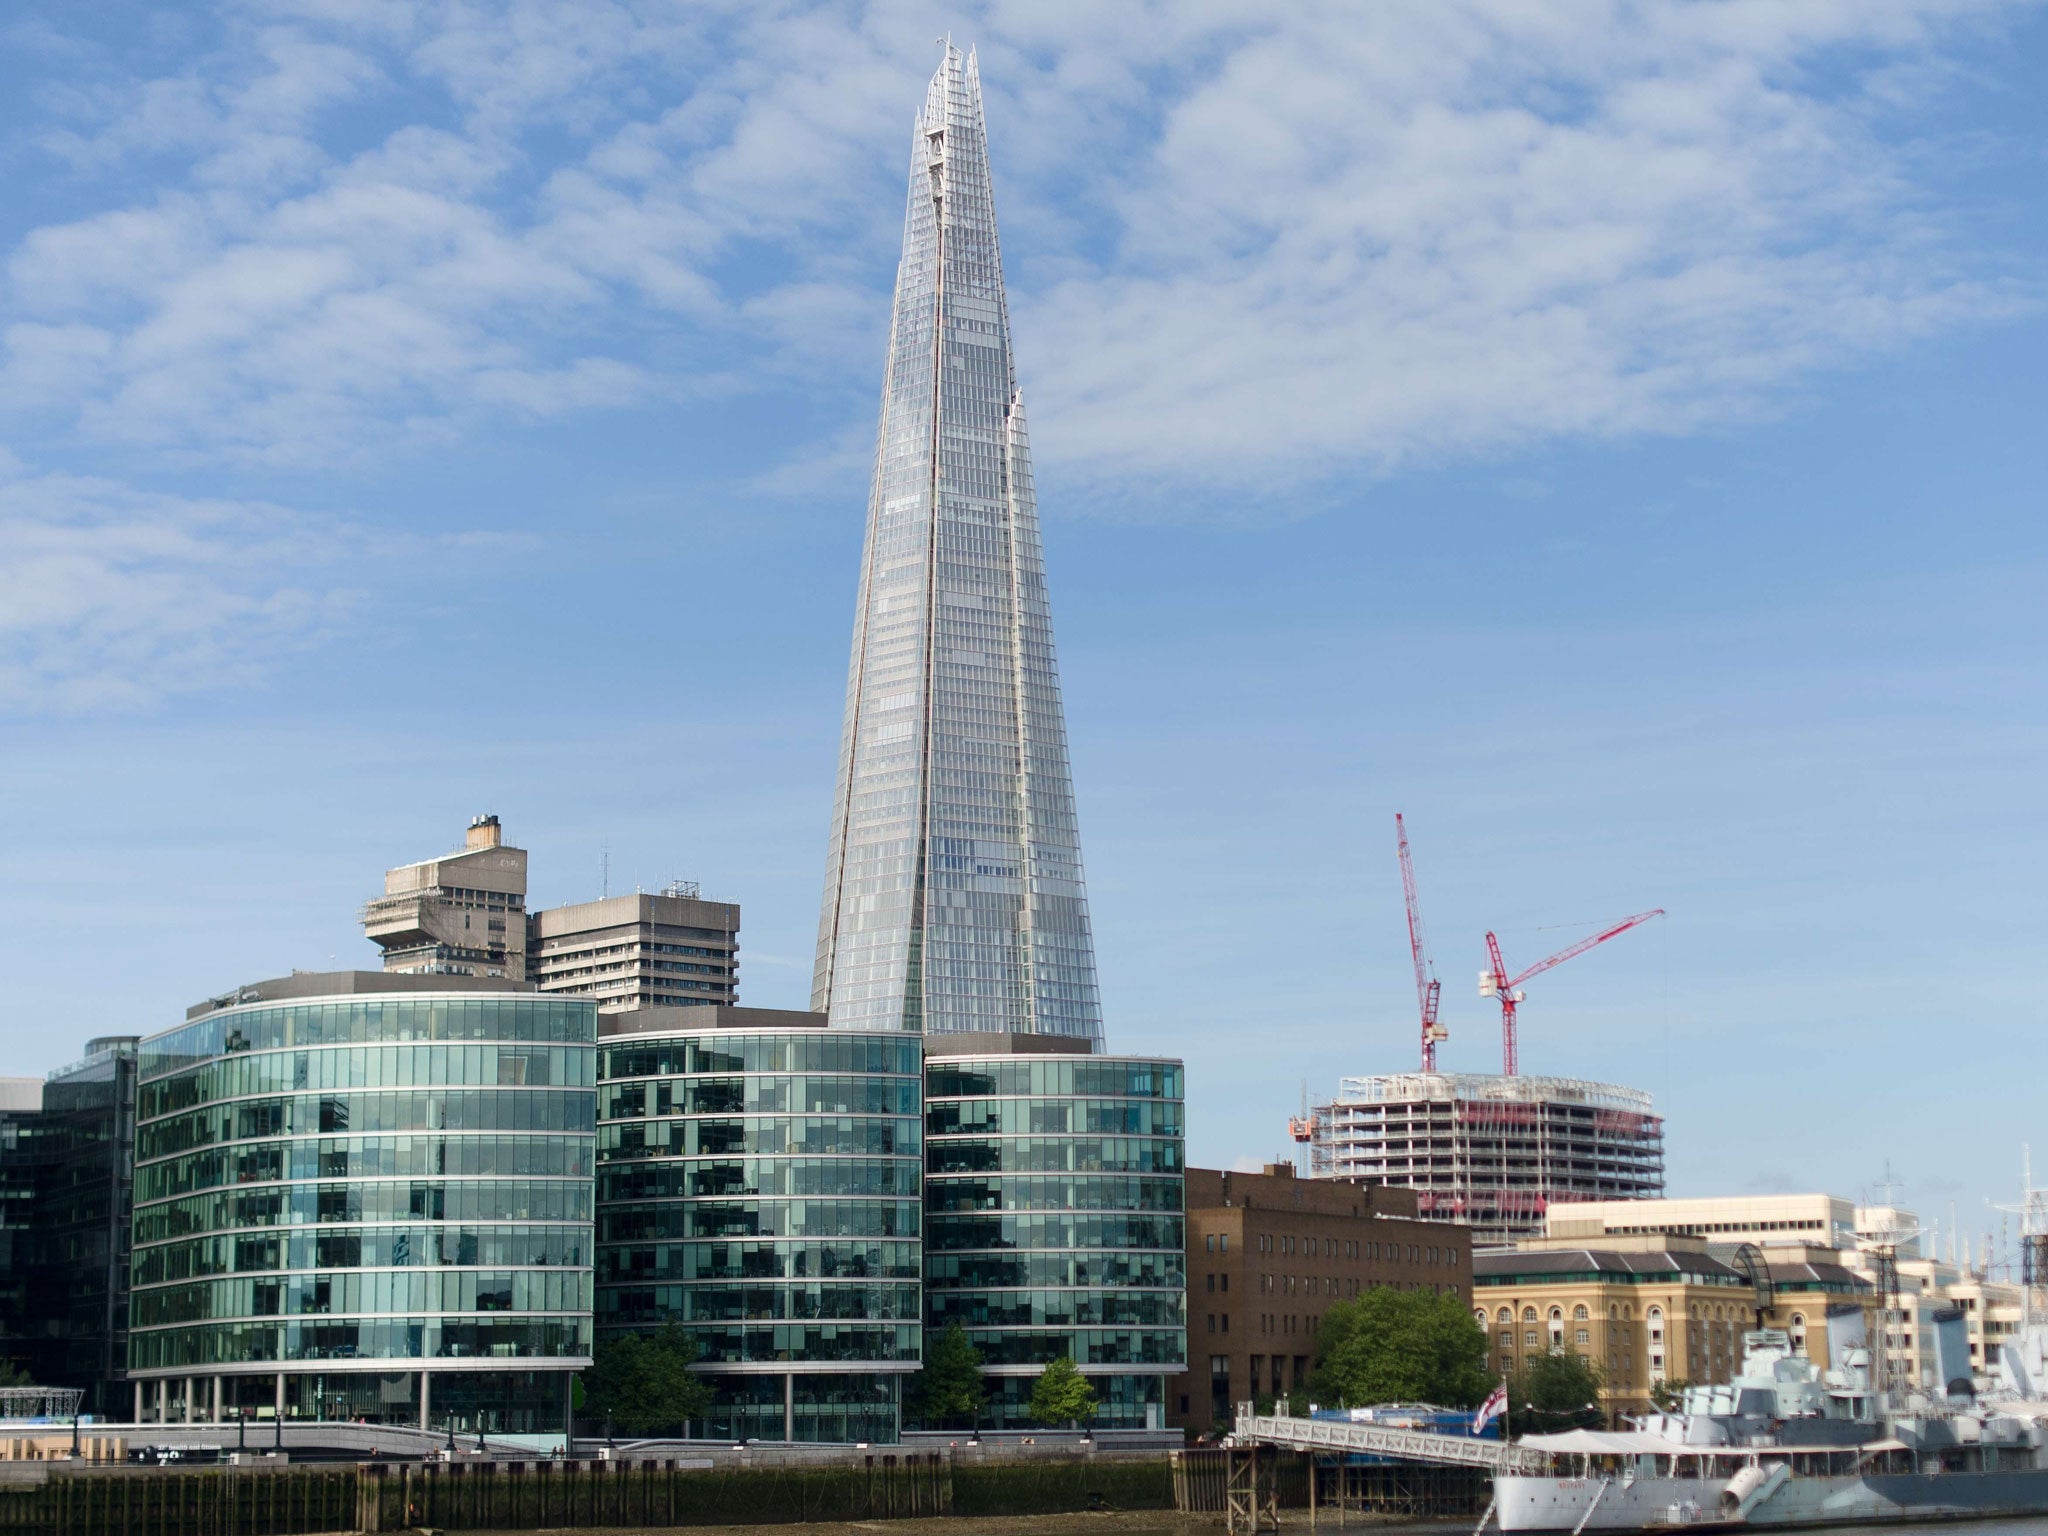 Free Shard tickets reserved for locals have been nabbed and put up for sale on eBay